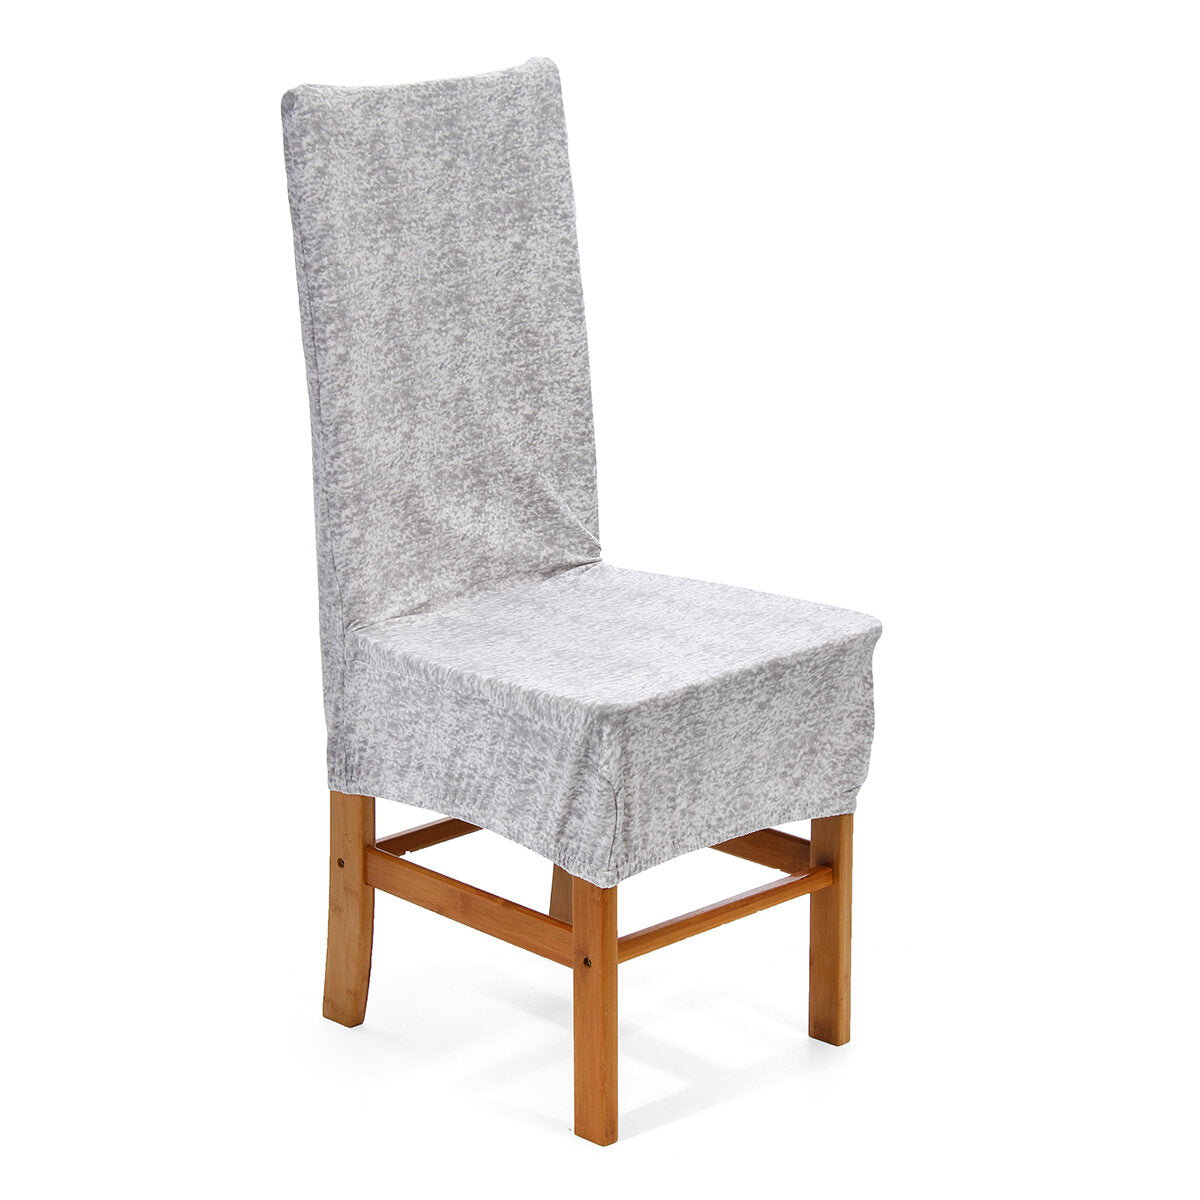 Dining Chair Cover Protector Home Office Furniture